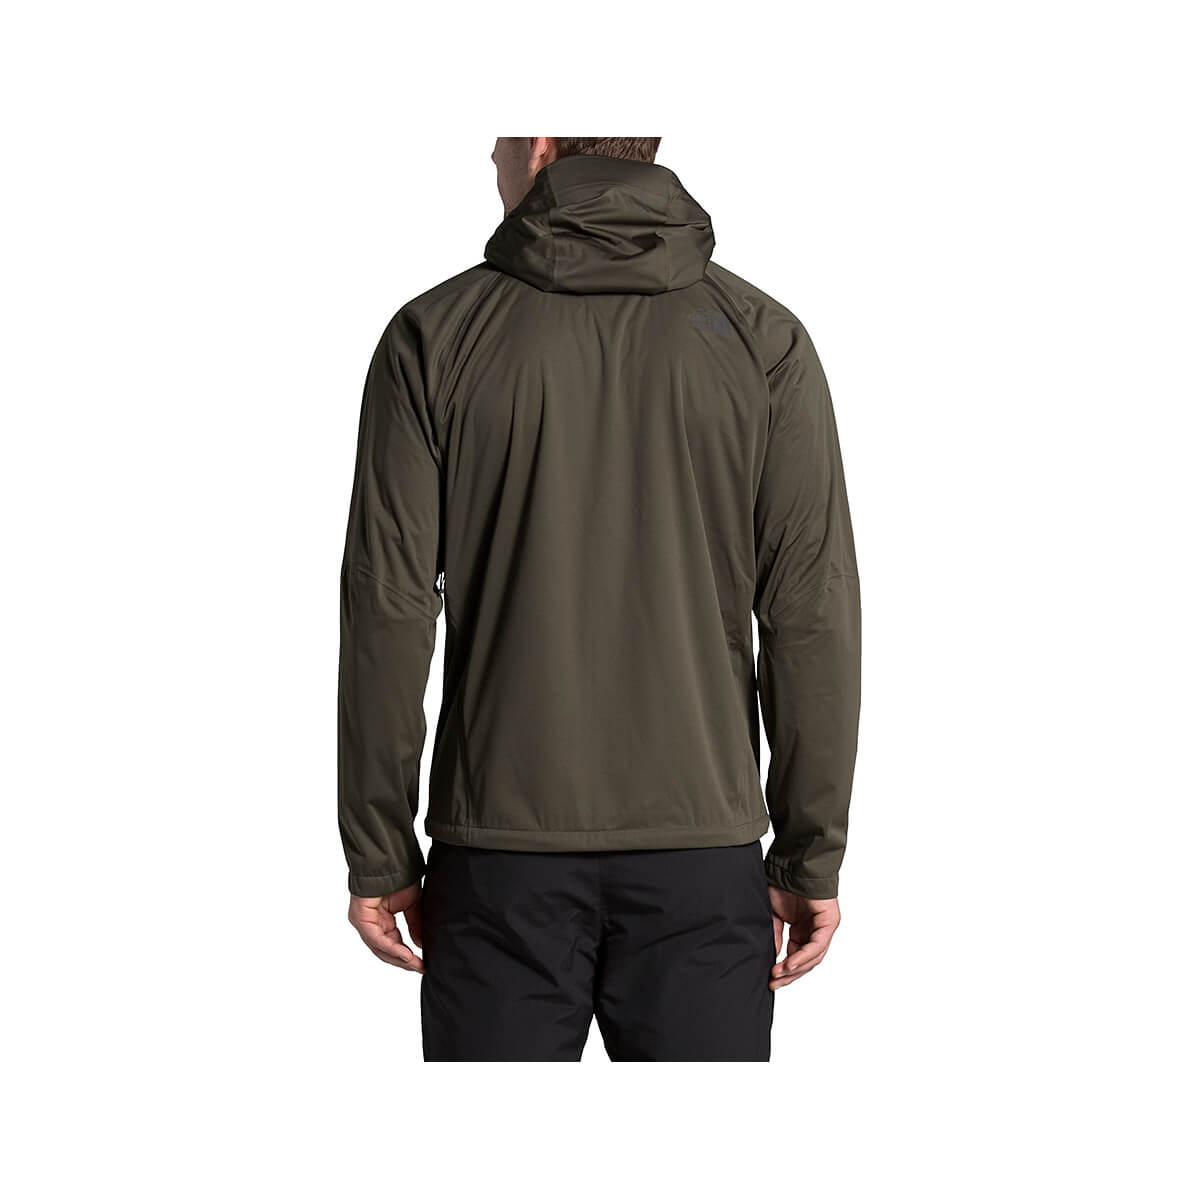 THE NORTH FACE | Men's Allproof Stretch Jacket